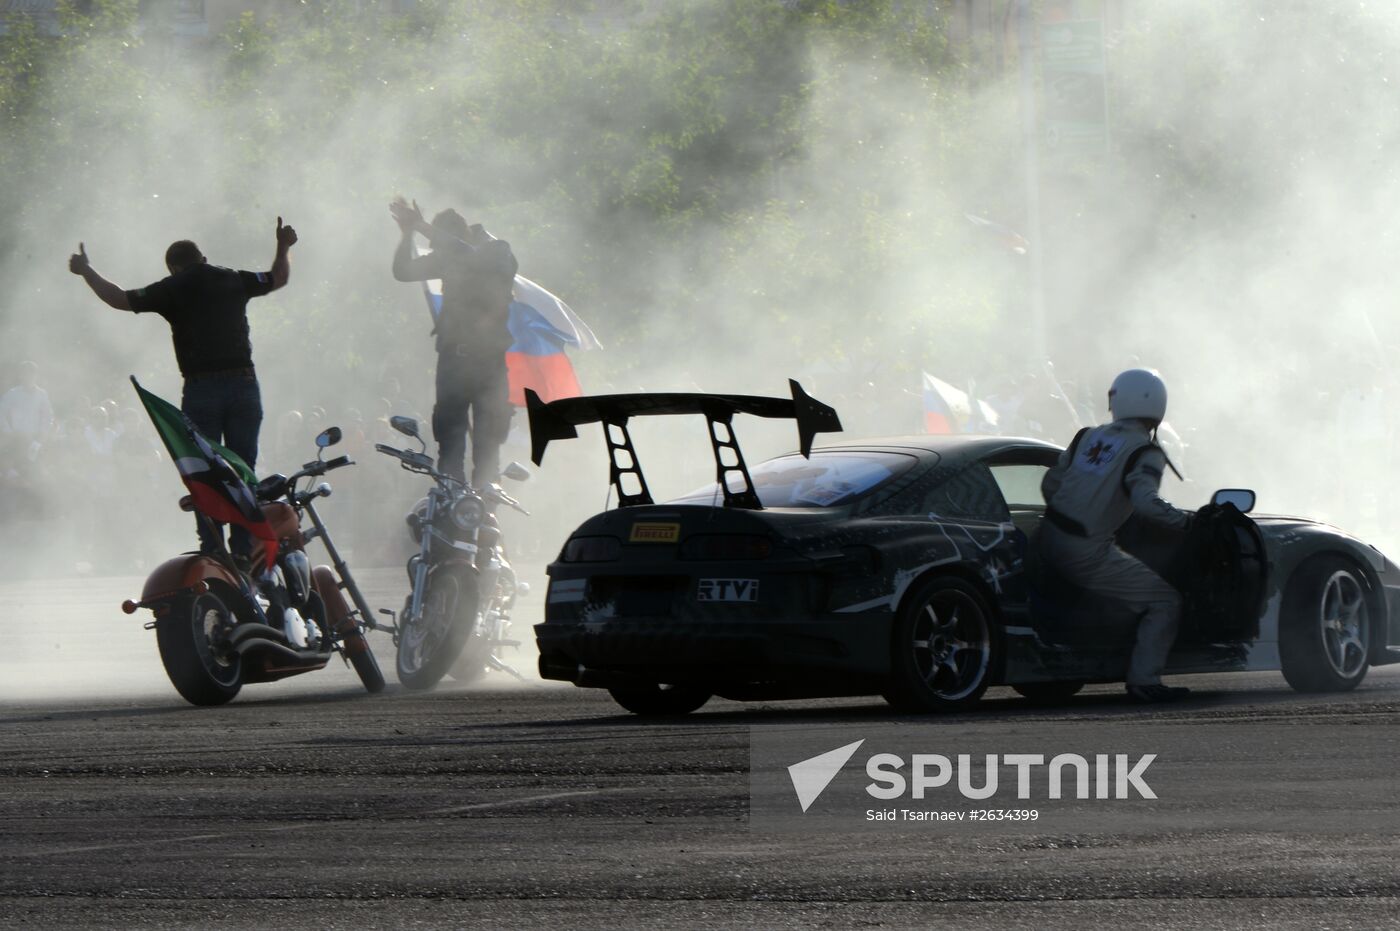 Drift show "Thanks for Victory" in Grozny